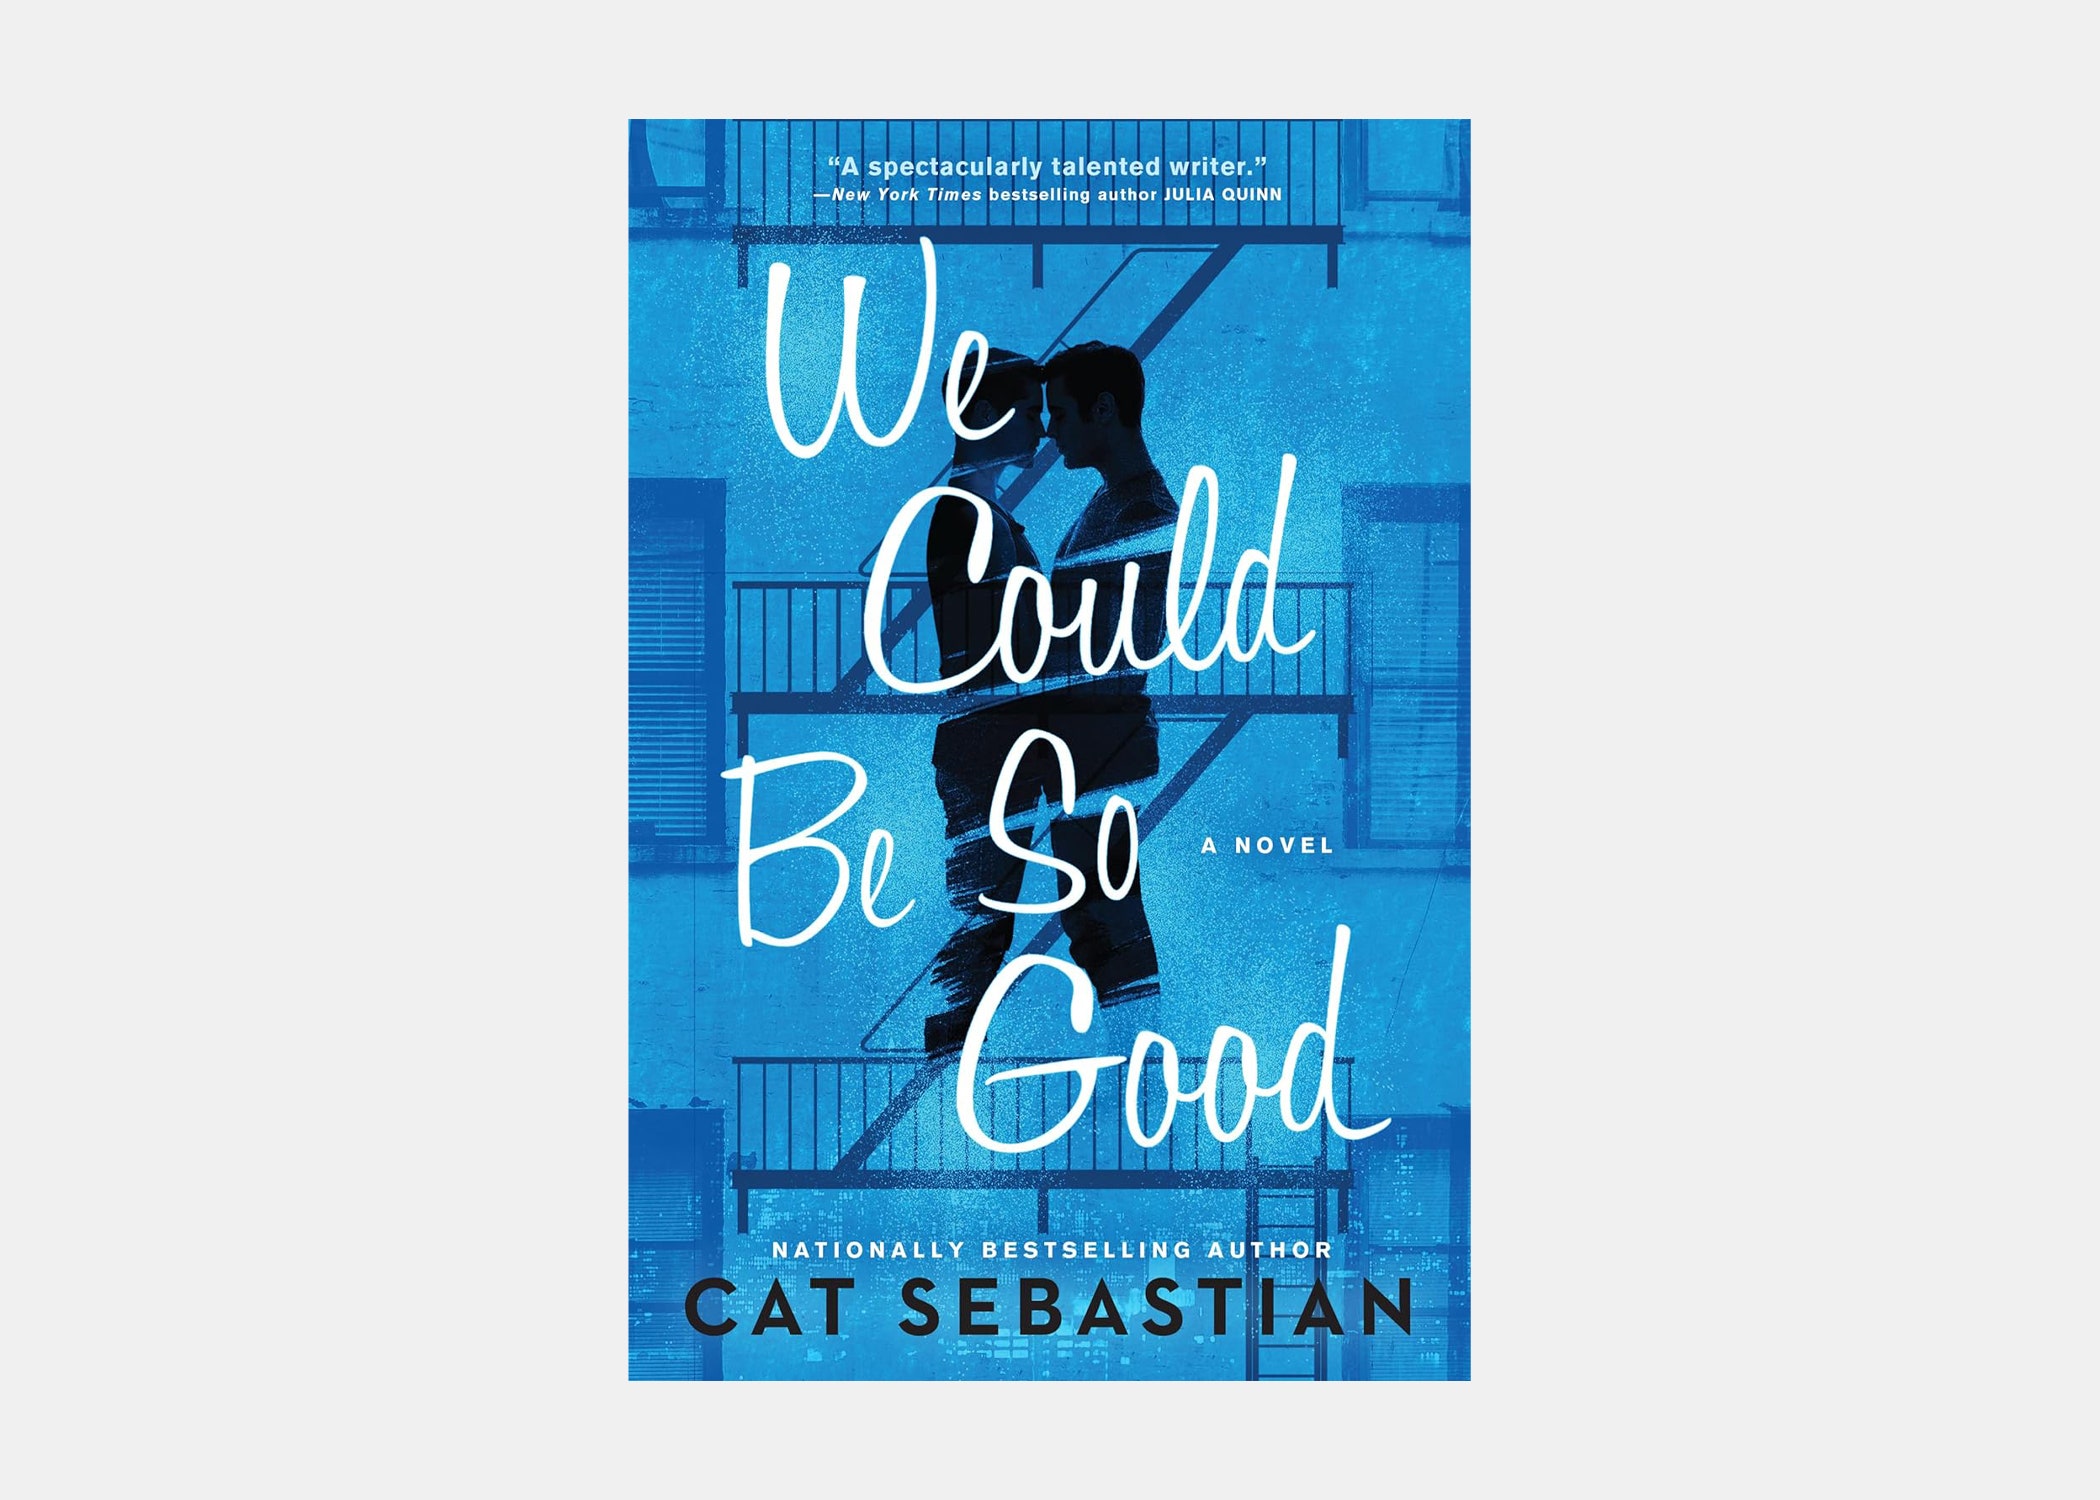 <p>If you have been searching for an LGBTQ romance novel, this is the one. <em>We Could Be So Good</em> follows working-class journalist Nick Russo and his budding friendship with the son of the owner of the newspaper, Andy Fleming, in the late 1950s. I read the first half on a flight from Bogota, Colombia, to Mexico City, Mexico, and finished it on my return flight. It’s full of love, joy, heartbreak, fear, and all of the other complex emotions queer people face daily.</p> <p><strong>Page count:</strong> 384</p> <p><strong>Average read time:</strong> 6 hours and 1 minute</p> $15, Amazon. <a href="https://www.amazon.com/We-Could-Be-So-Good/dp/0063272768/ref=tmm_pap_swatch_0">Get it now!</a><p>Sign up to receive the latest news, expert tips, and inspiration on all things travel</p><a href="https://www.cntraveler.com/newsletter/the-daily?sourceCode=msnsend">Inspire Me</a>